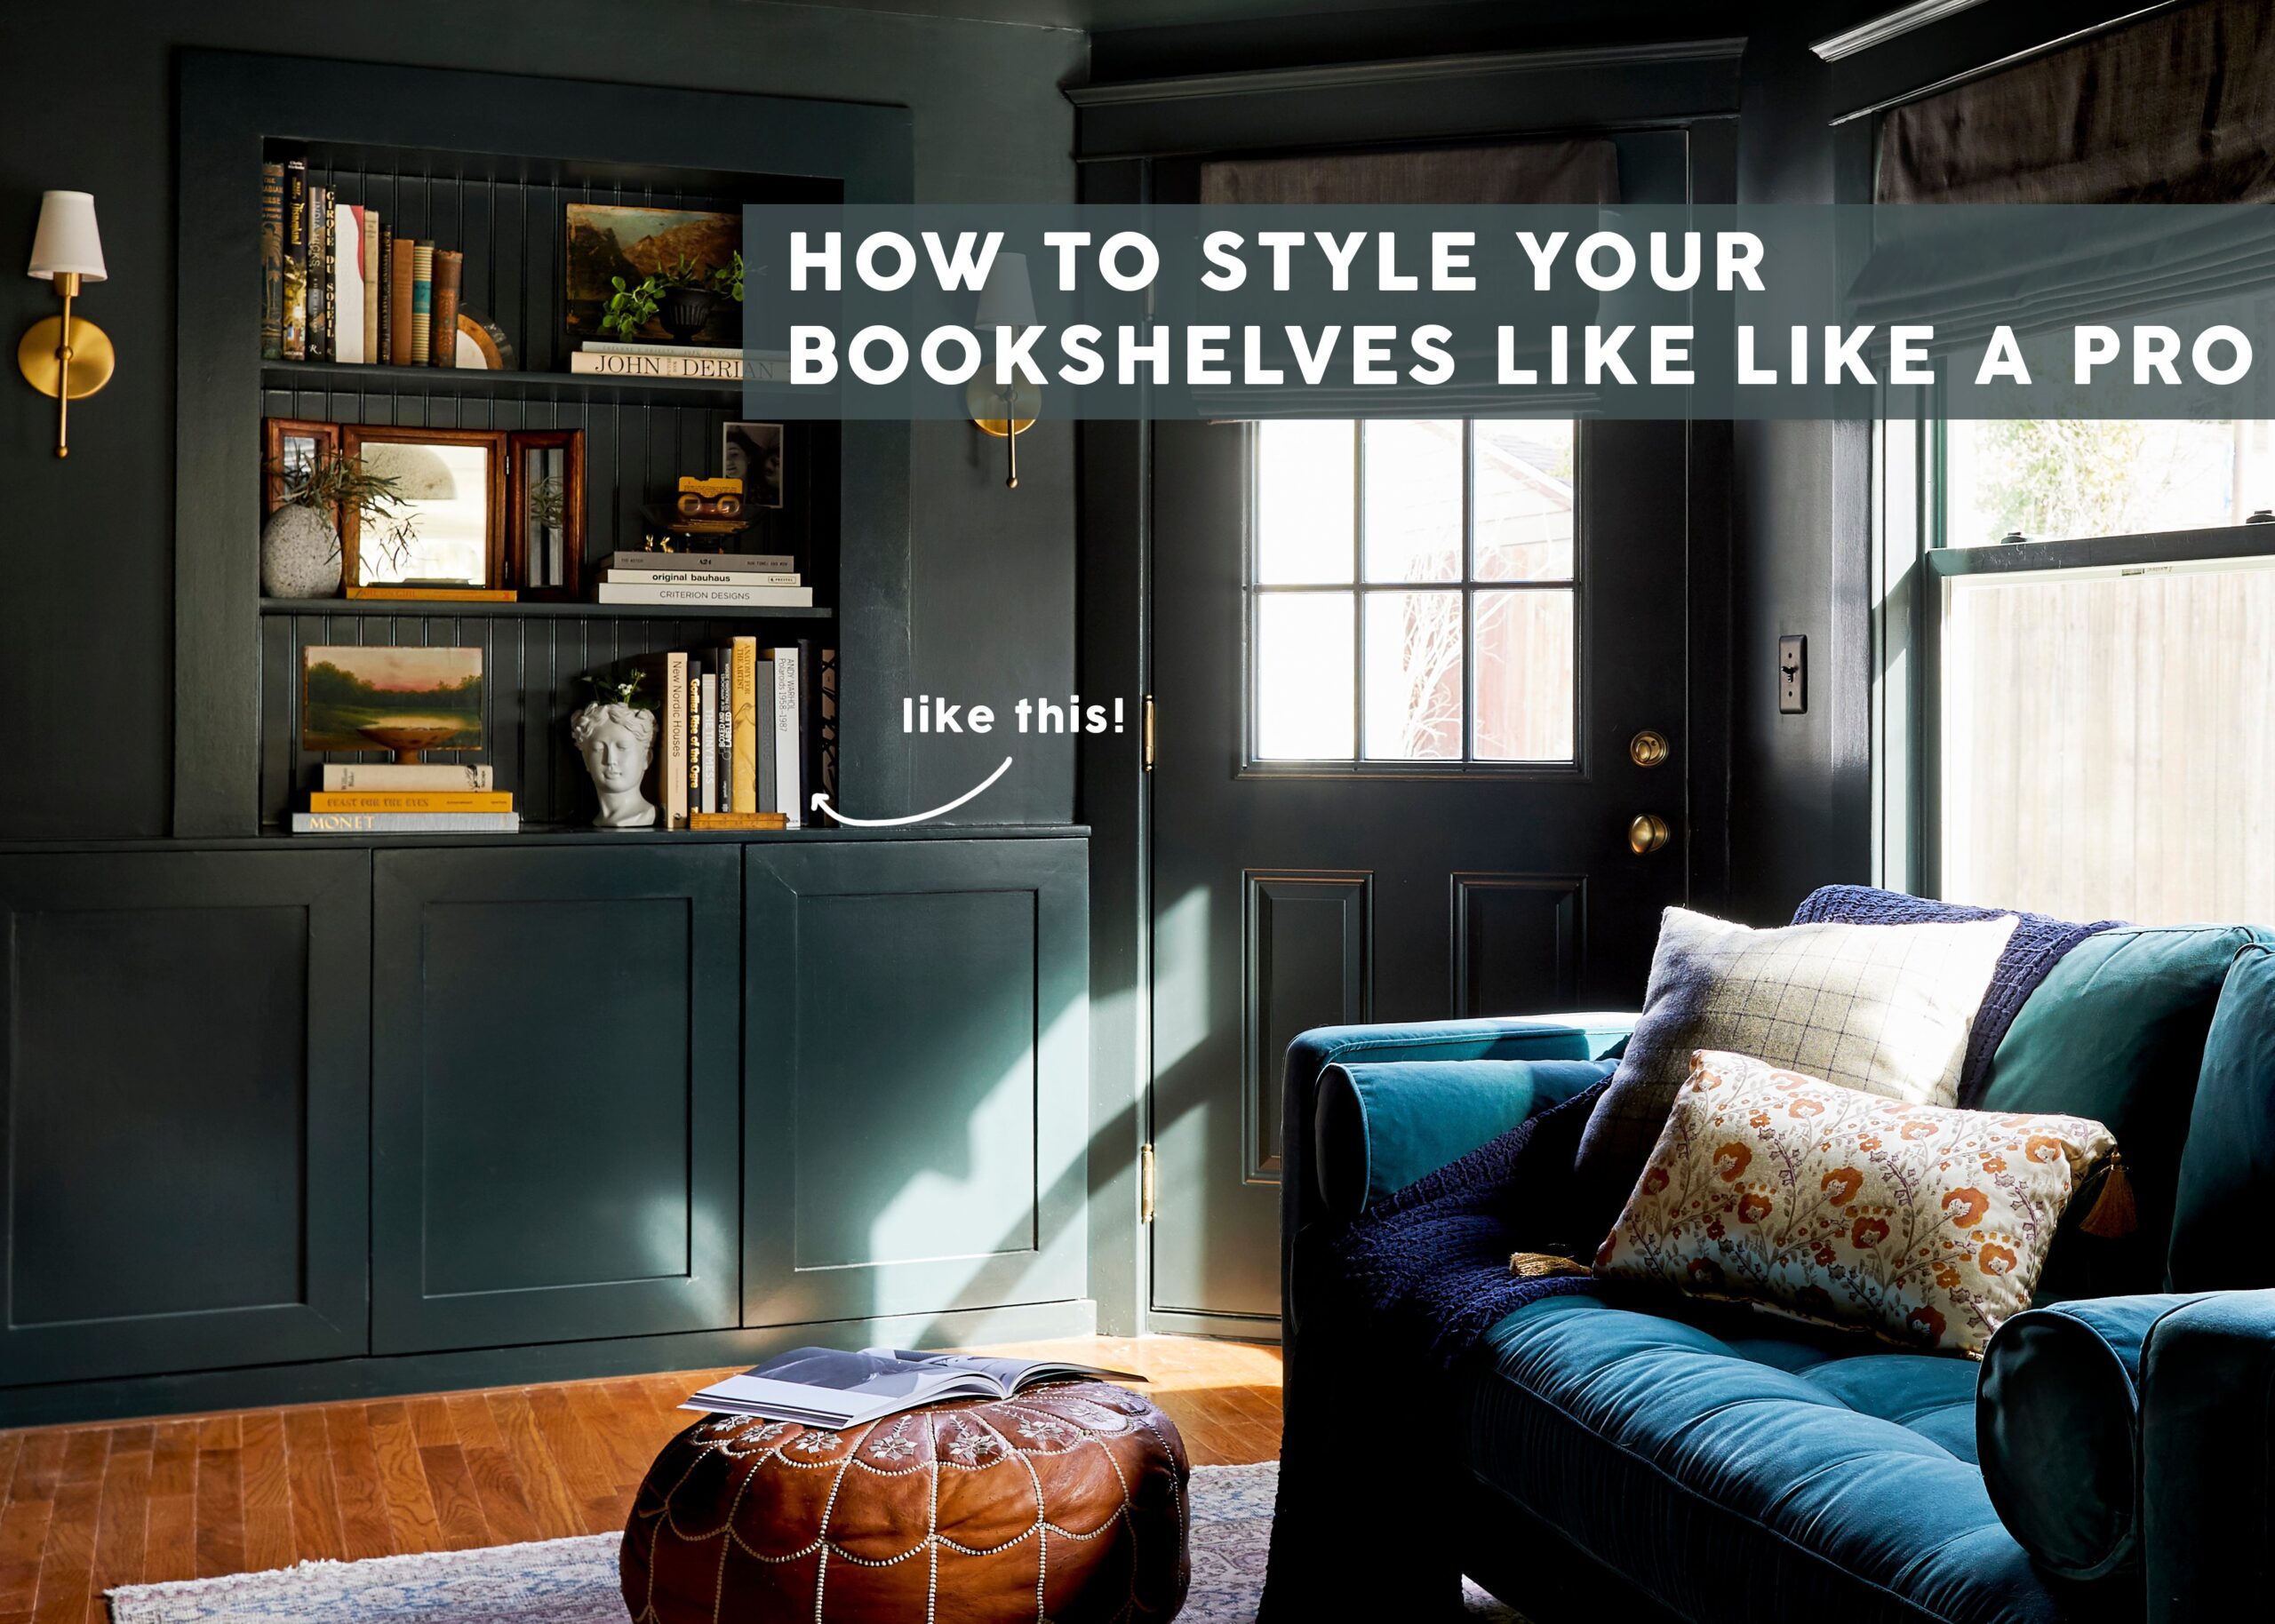 Make Your Shelves Look Better With These 4 Easy Bookshelf Styling Formulas